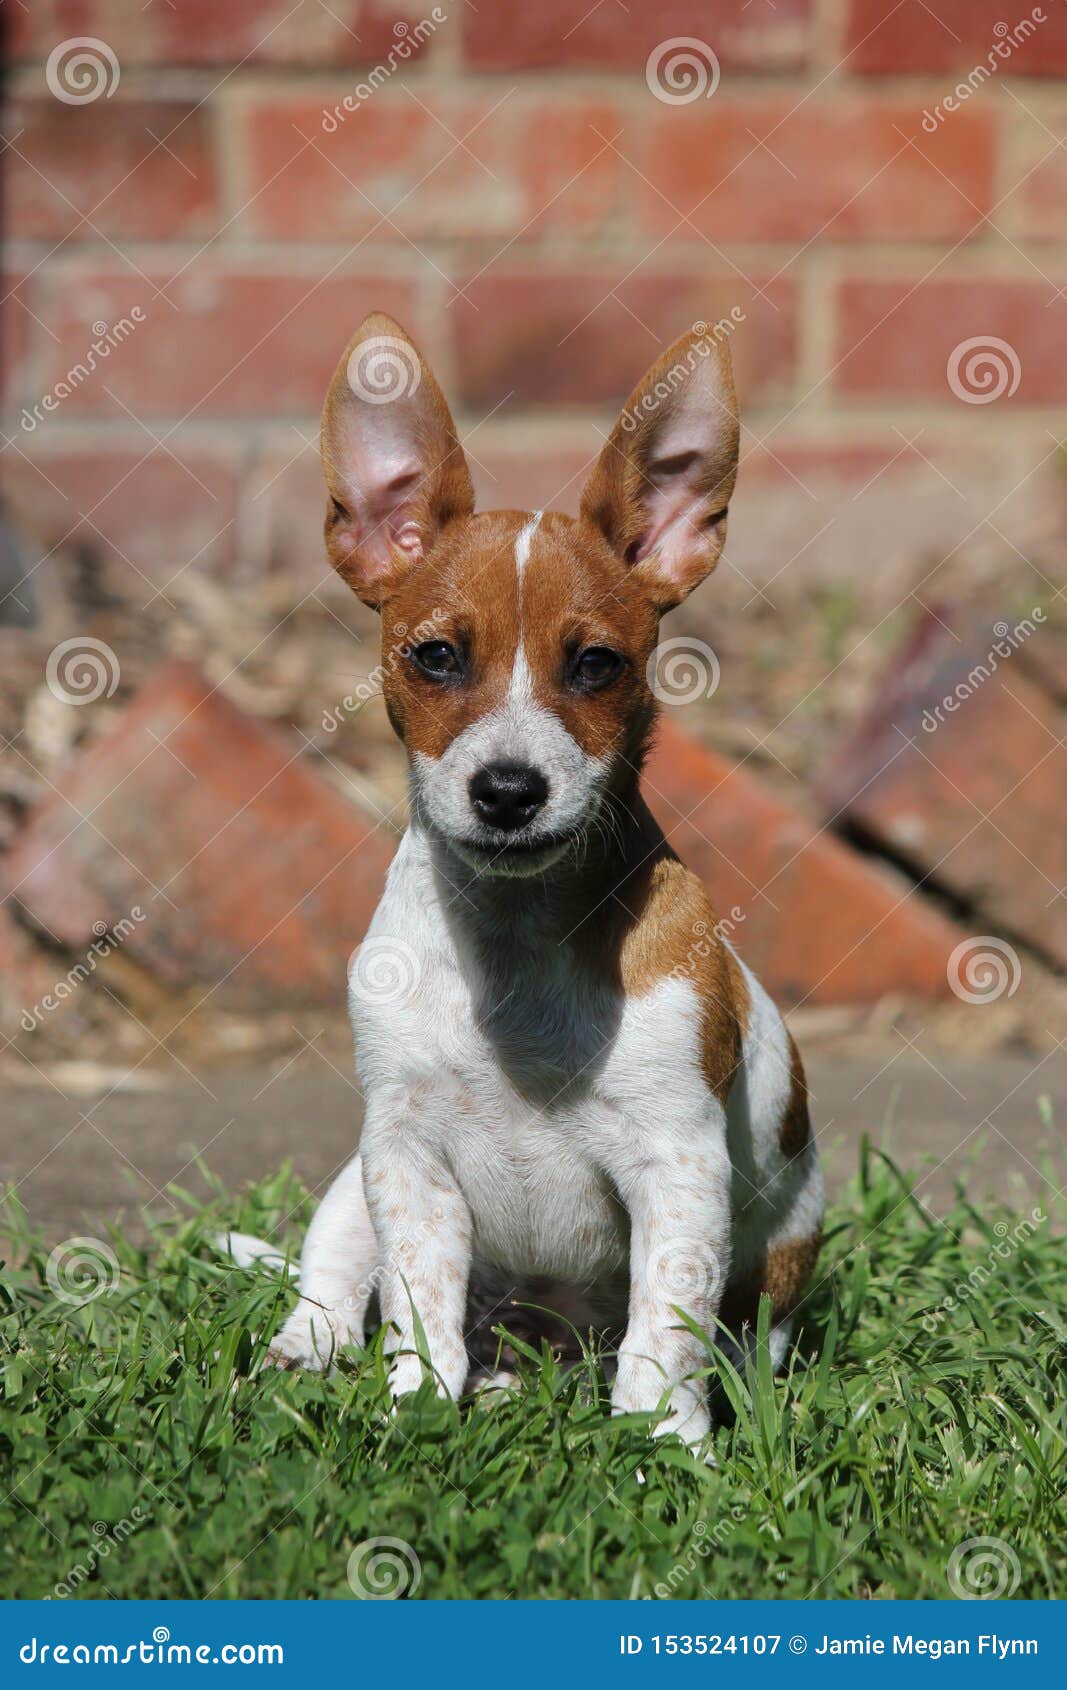 120 Jack Russell Terrier Big Ears Photos Free Royalty Free Stock Photos From Dreamstime